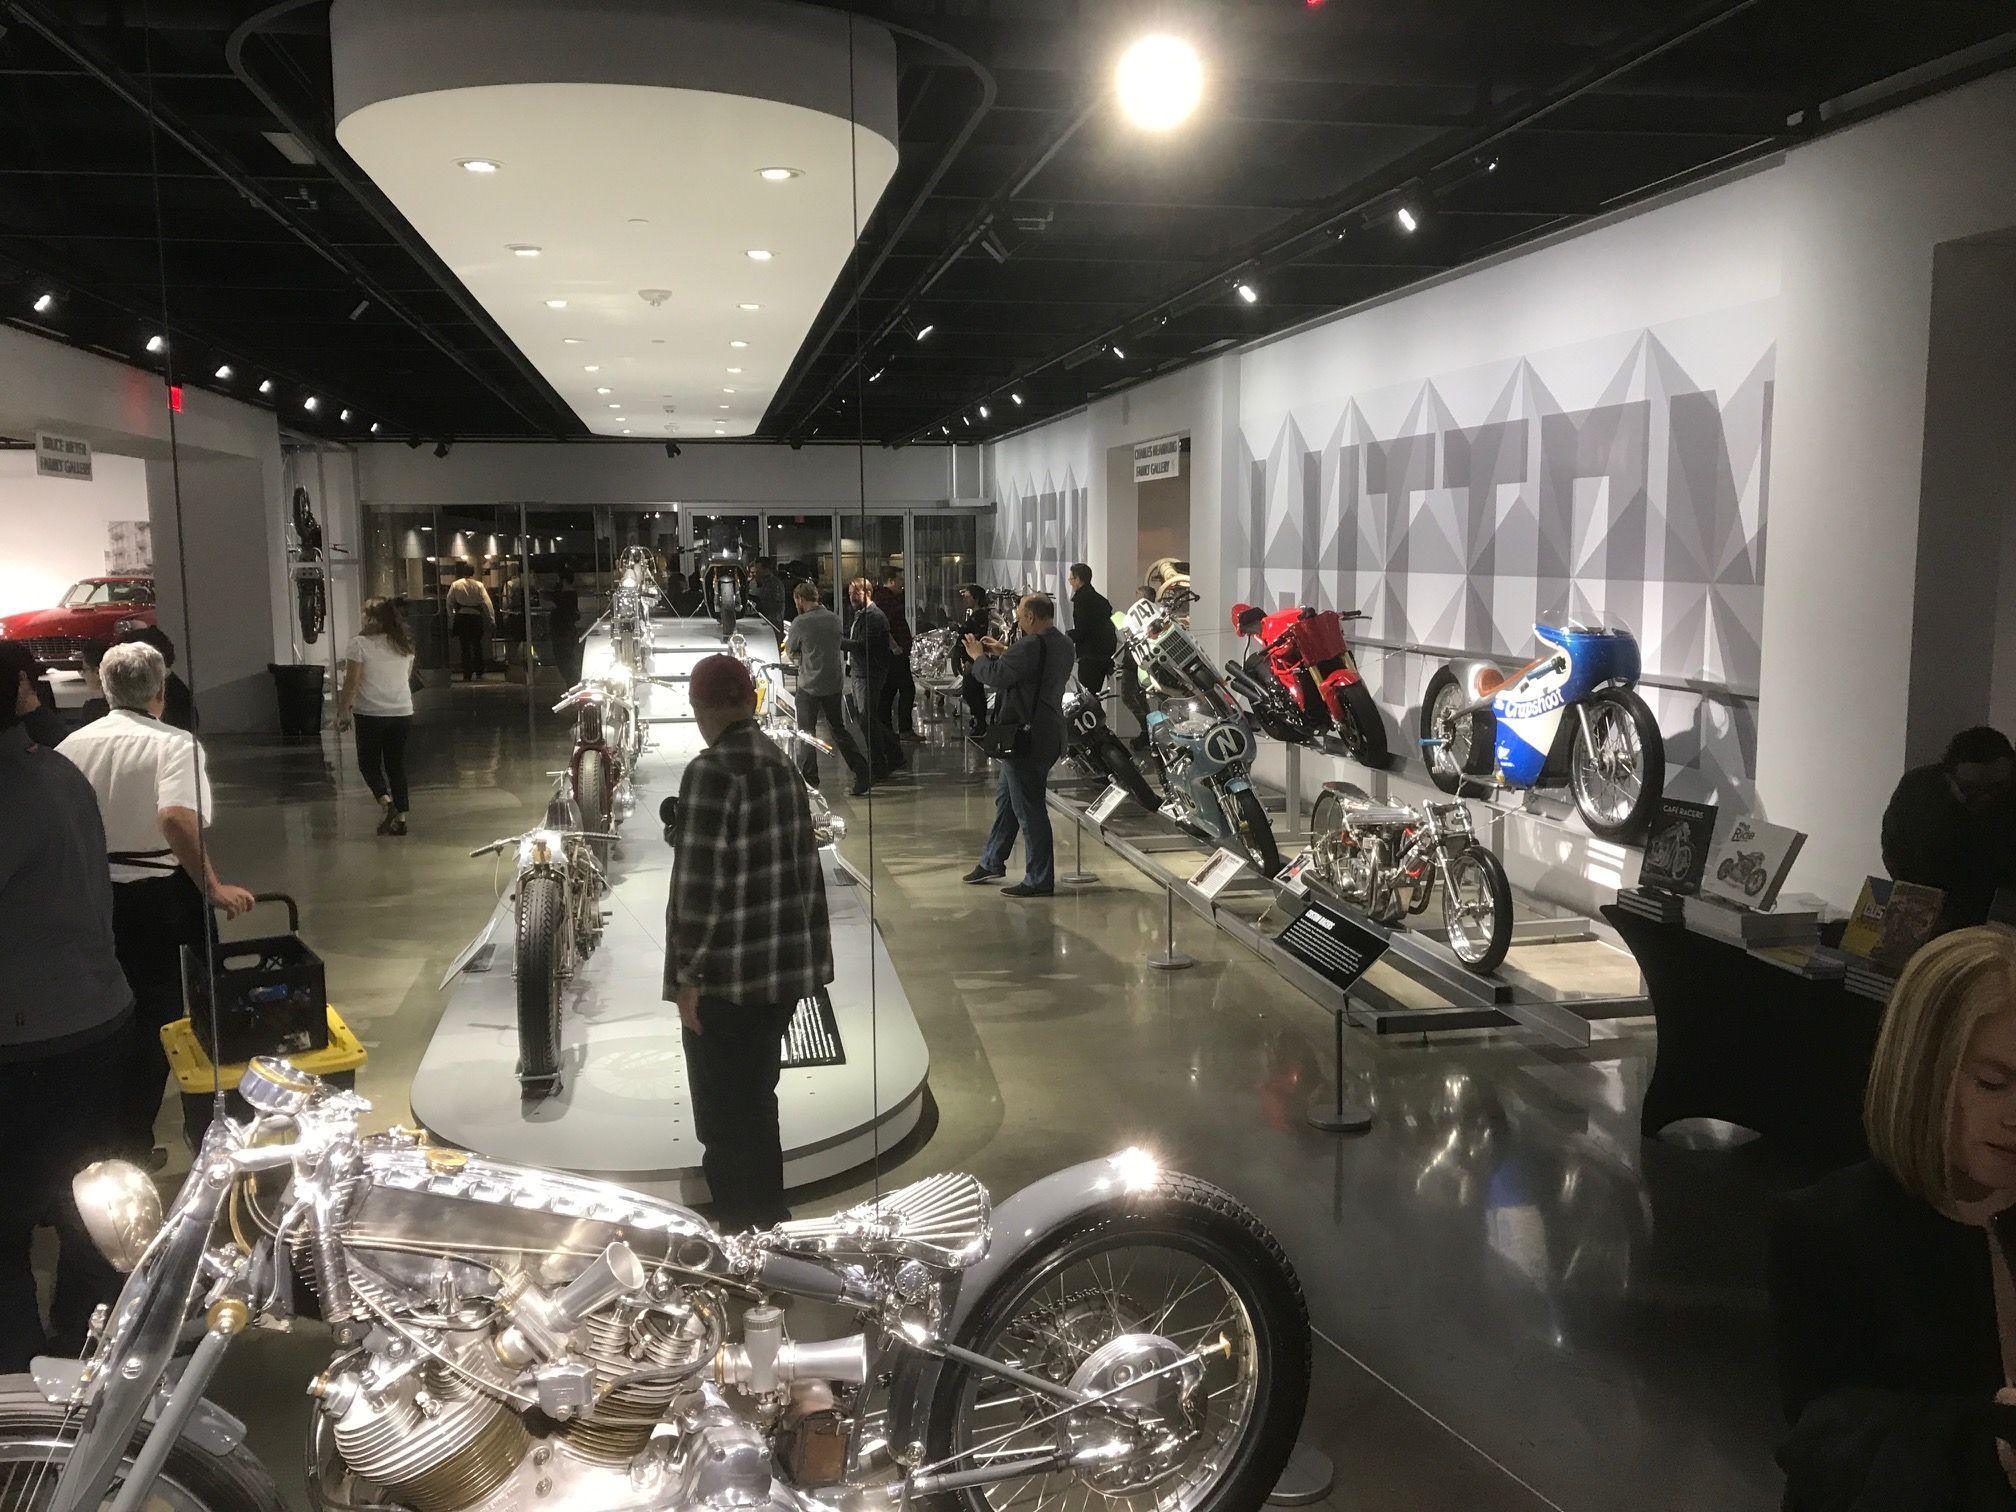 The exhibition includes one-off bikes of all types from every era